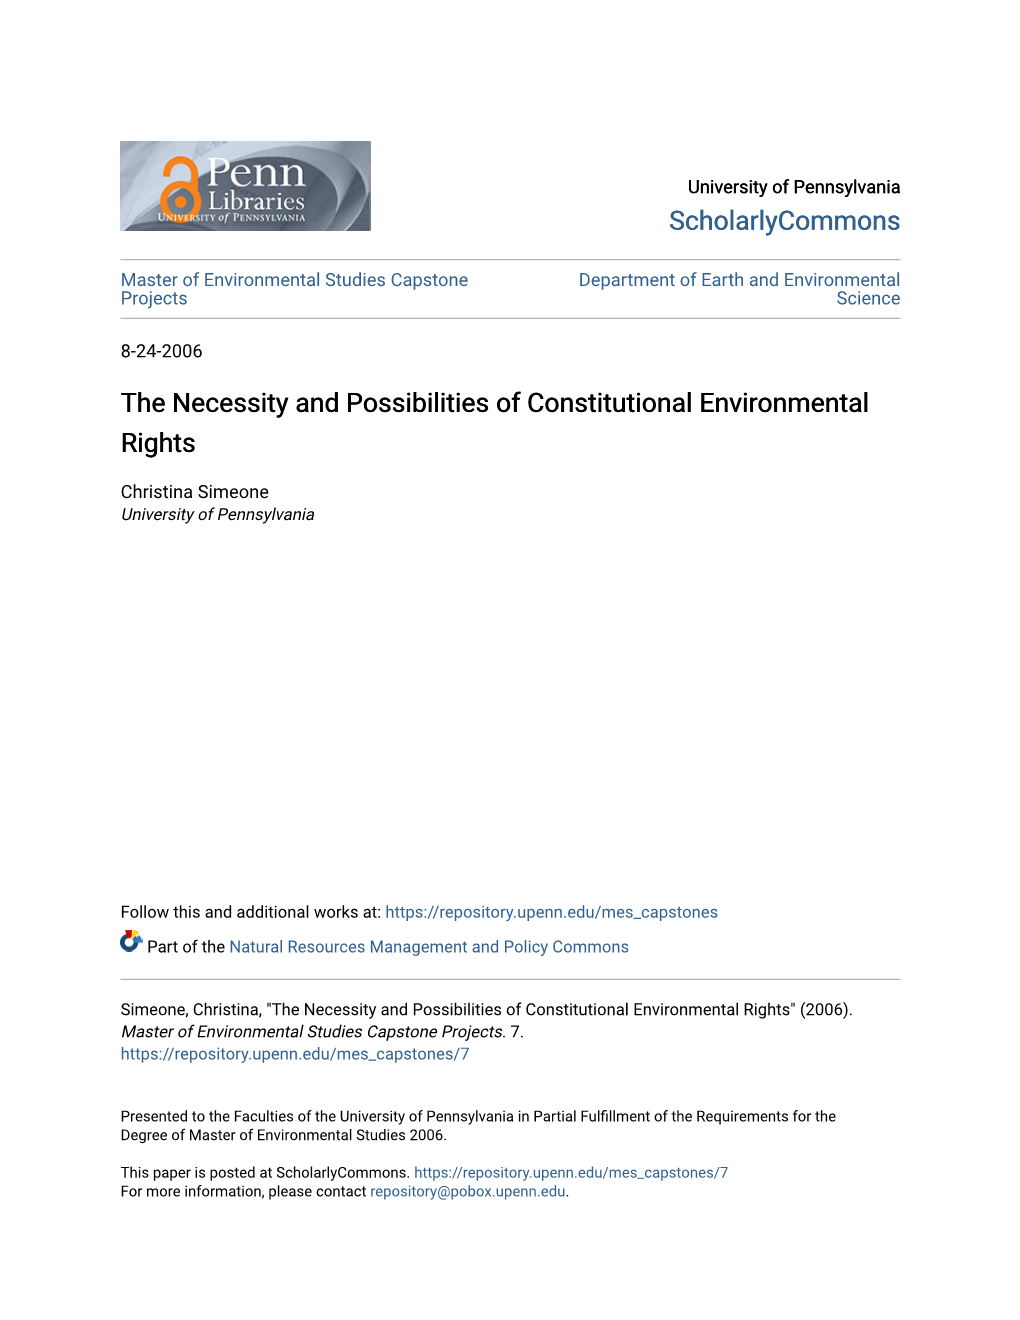 The Necessity and Possibilities of Constitutional Environmental Rights